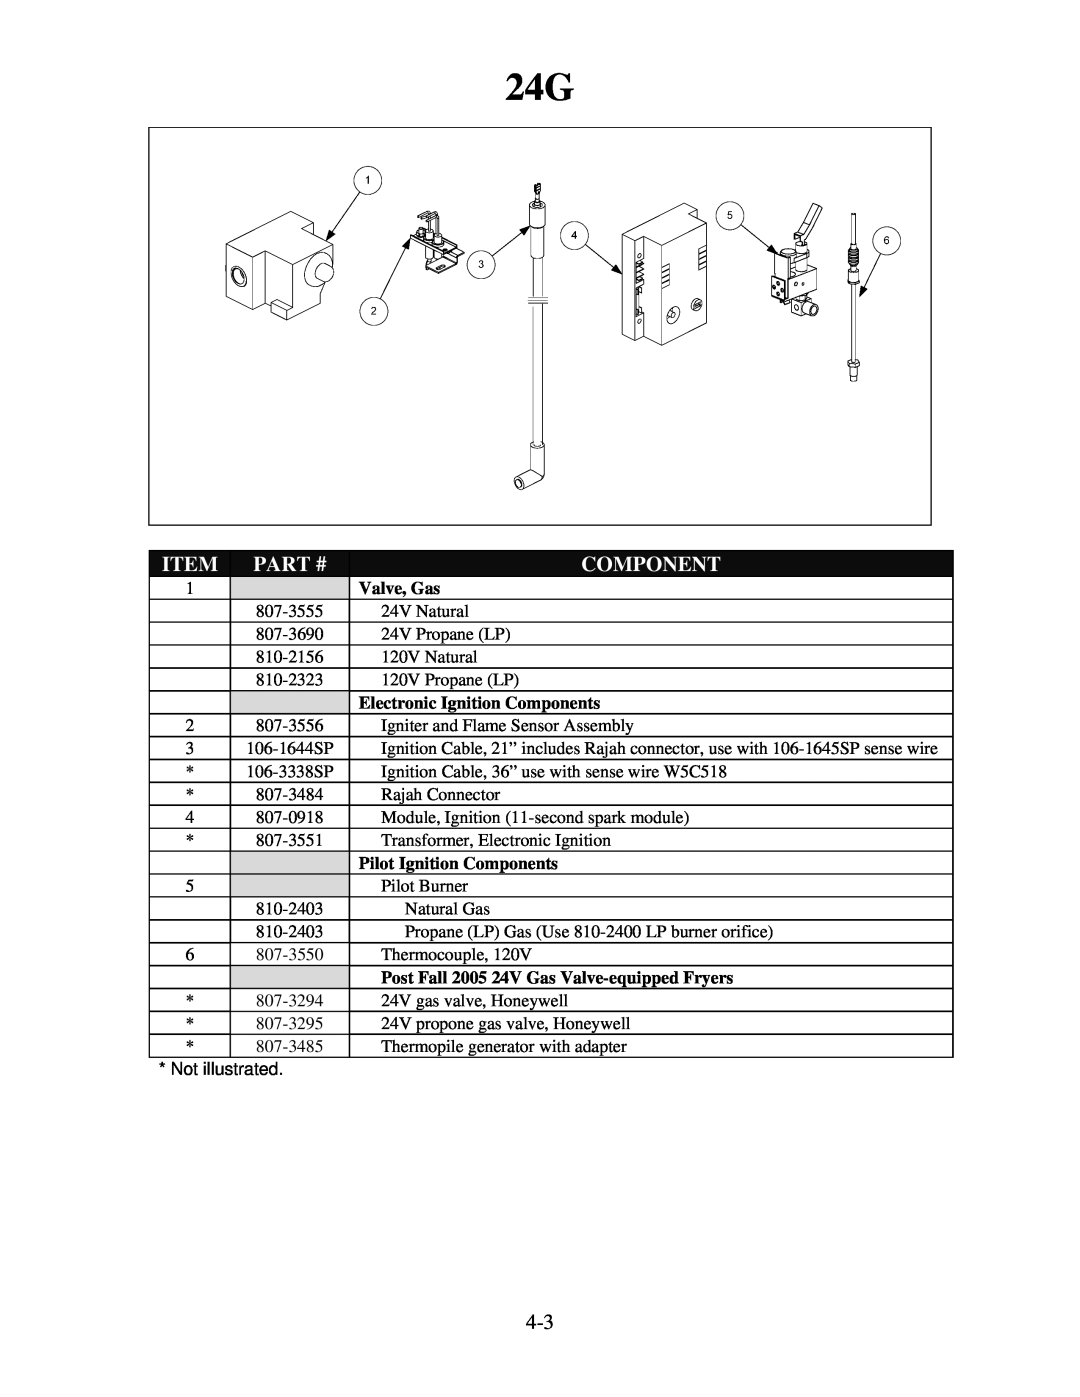 Frymaster H55 manual Part #, Valve, Gas, Electronic Ignition Components, Pilot Ignition Components 